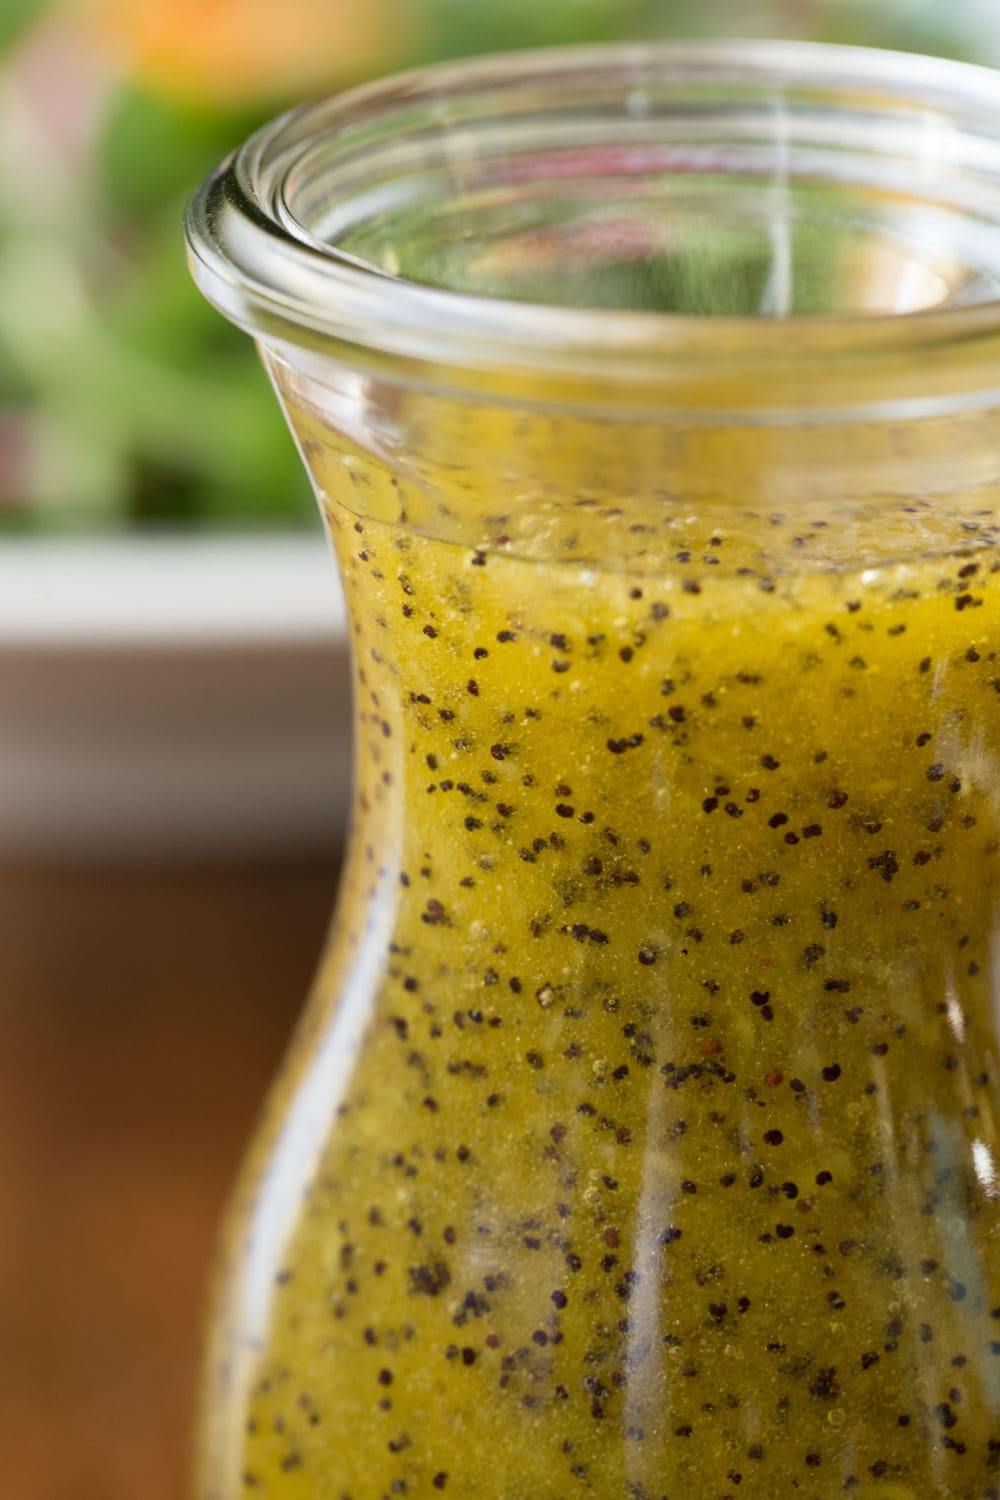 Lemon Ginger Poppyseed Salad Dressing - this super easy dressing transform boring greens to bright fresh and delicious salads.